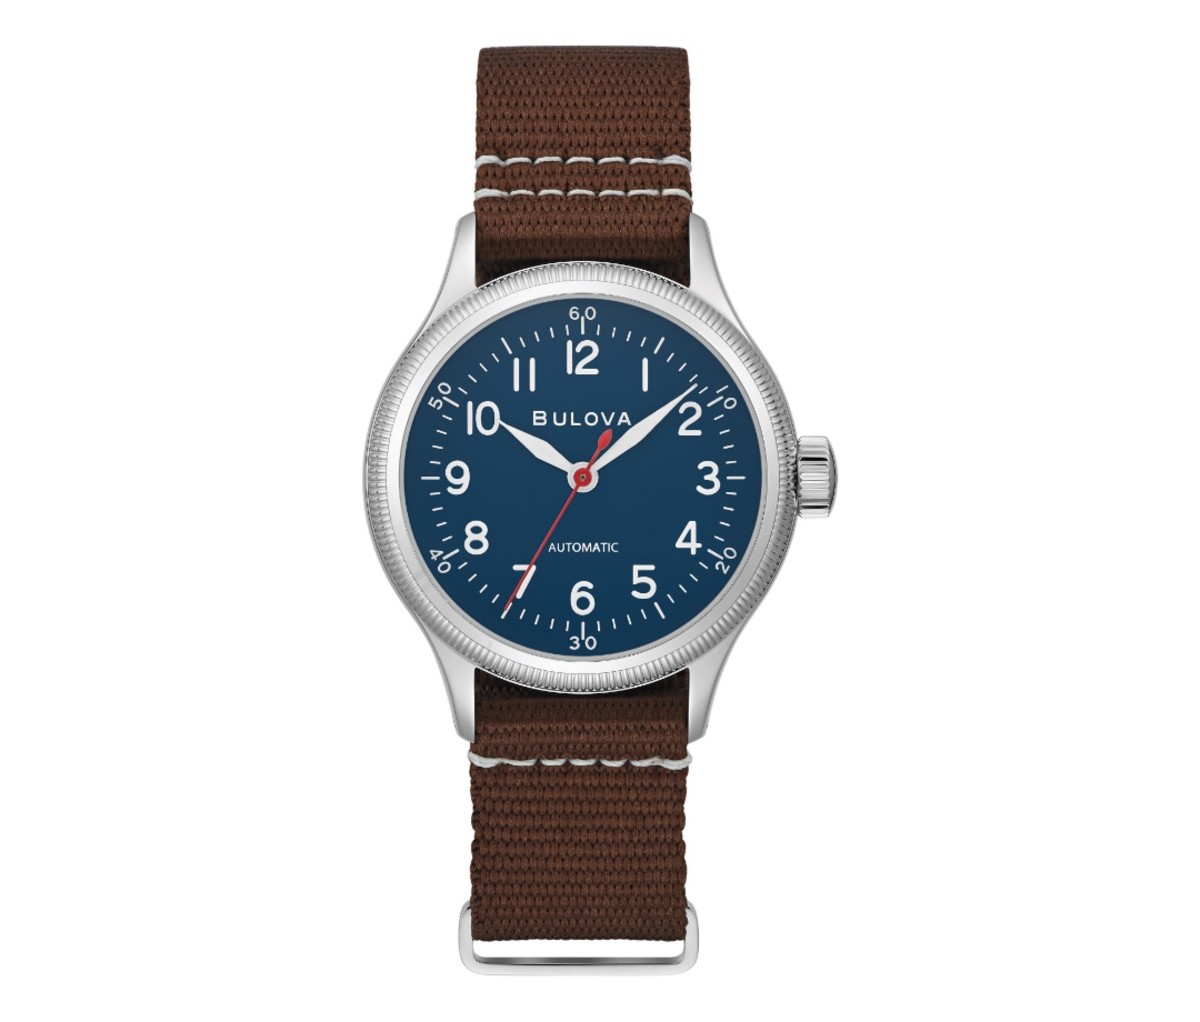 Bulova A-11 Hack Watch with a brown strap and a blue dial on a white background.